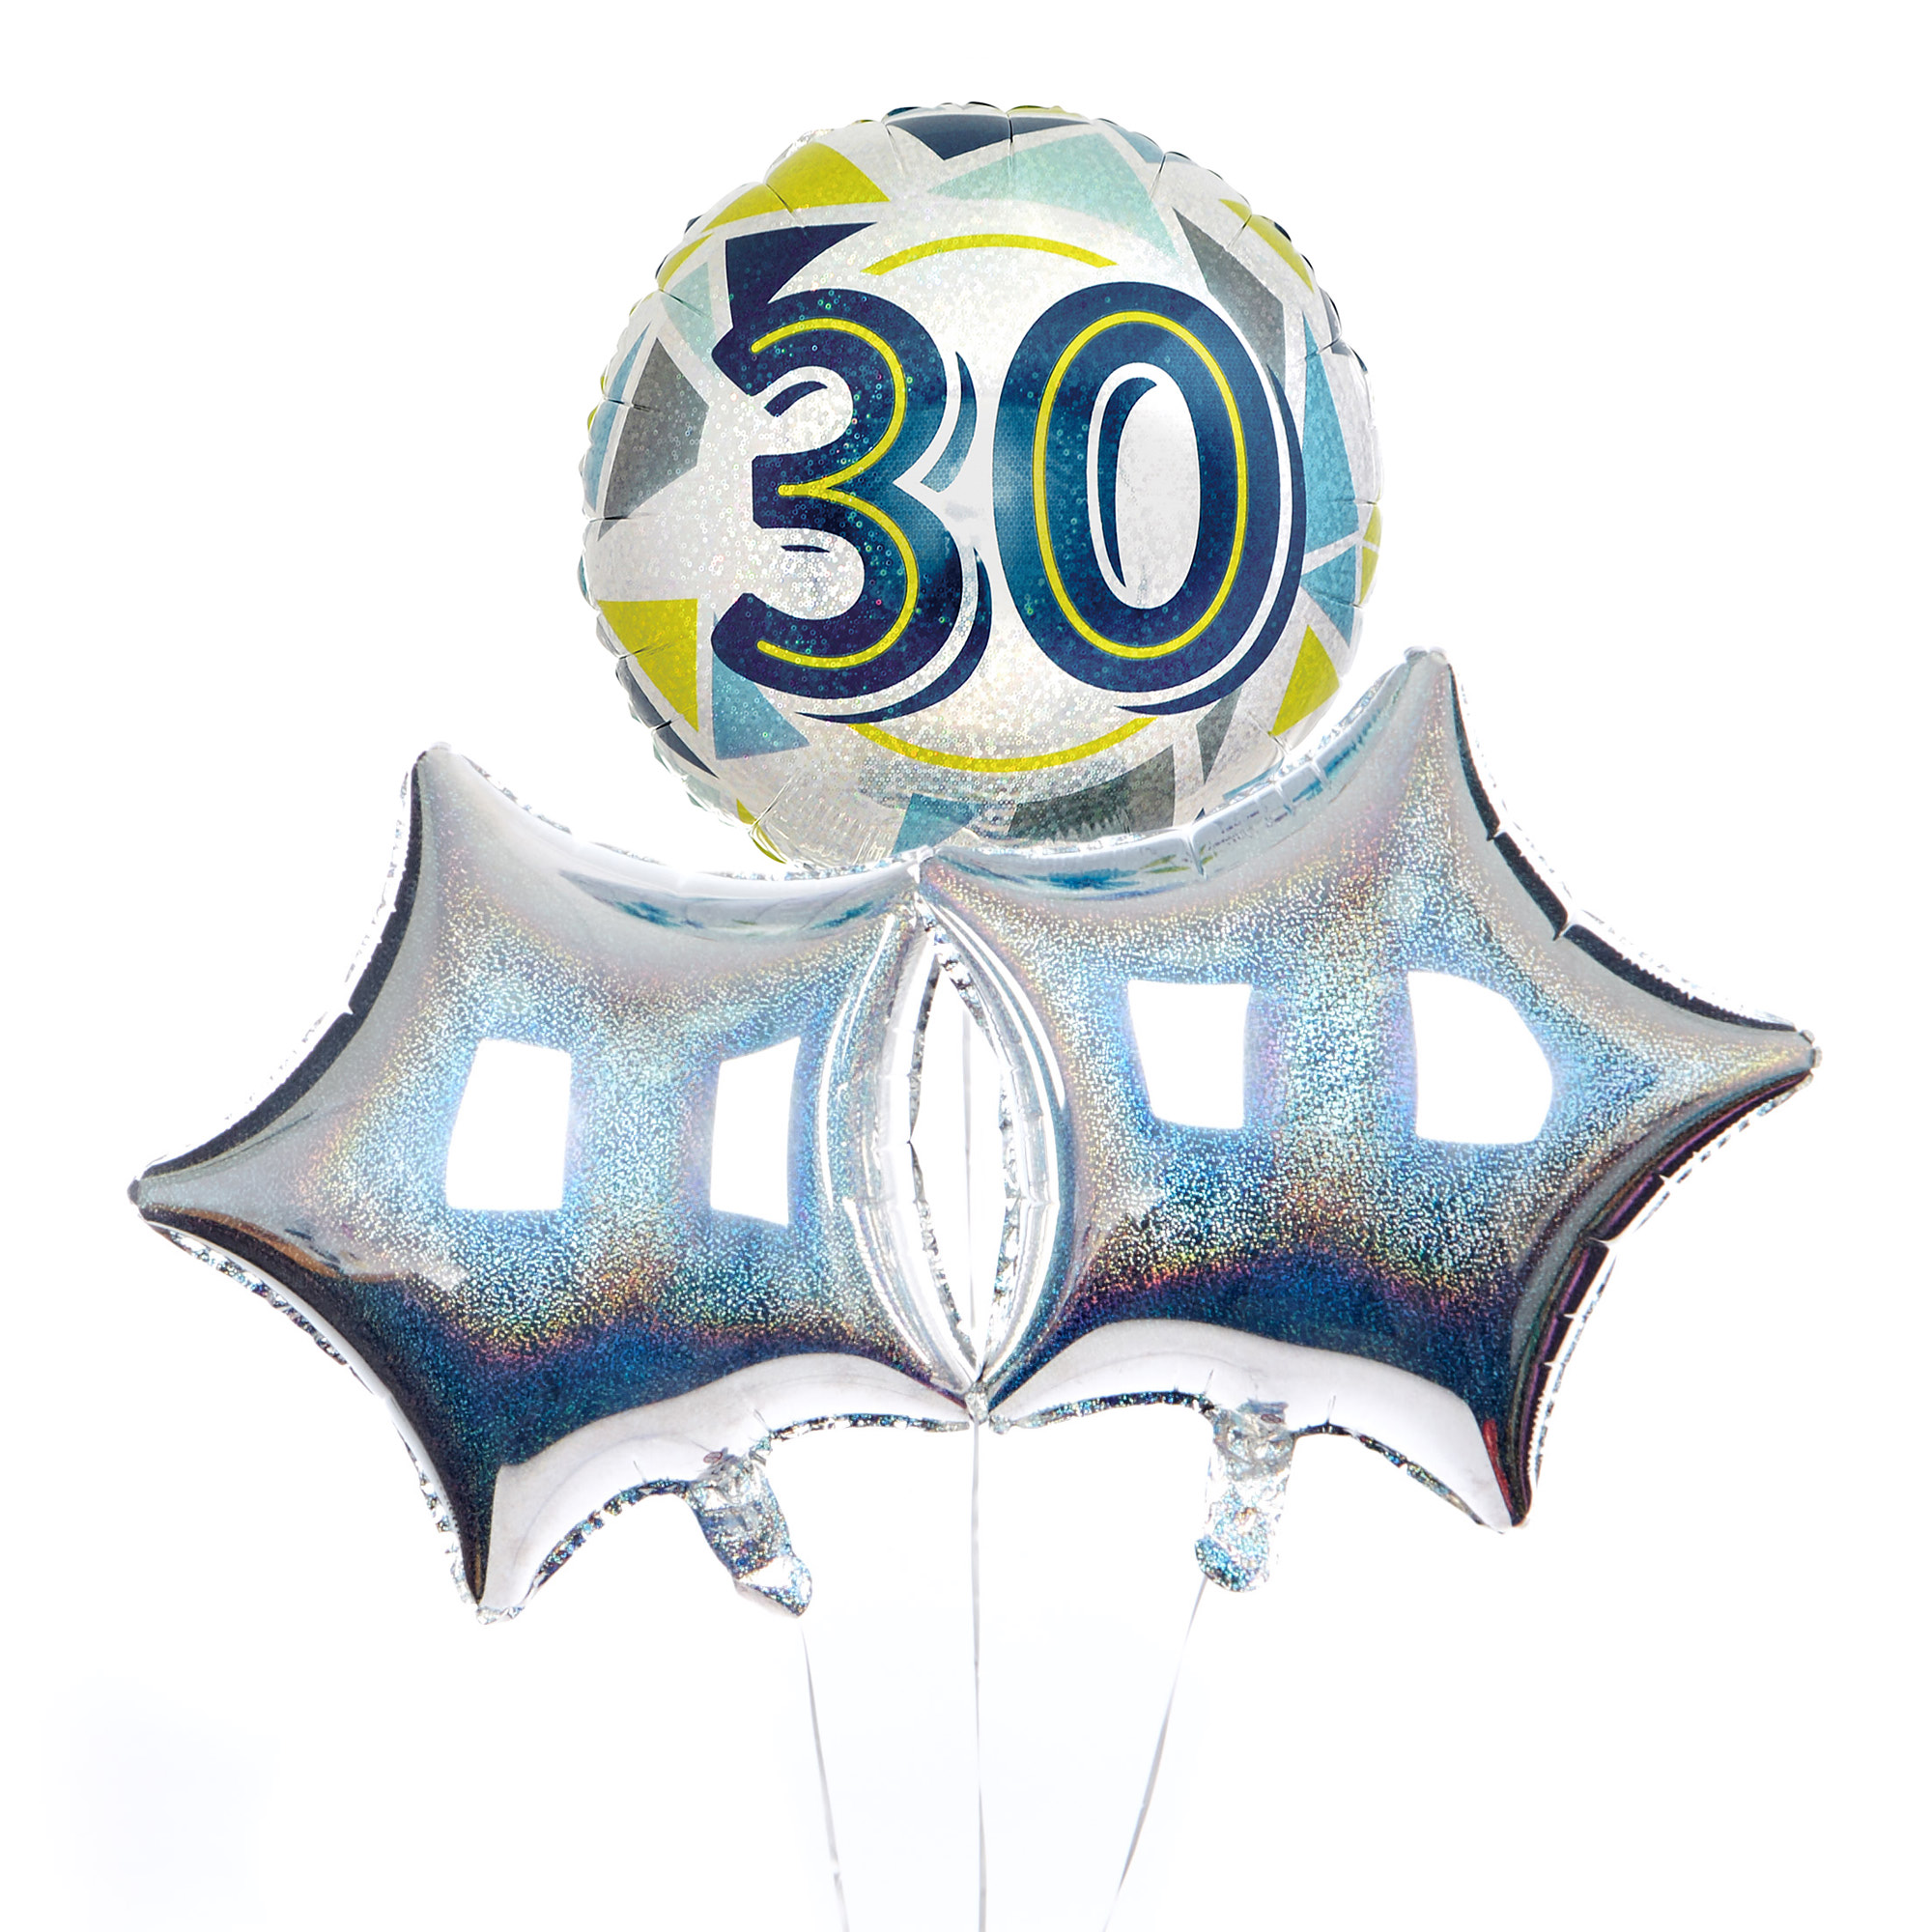 Geometric Blue & Yellow 30th Birthday Balloon Bouquet - DELIVERED INFLATED!